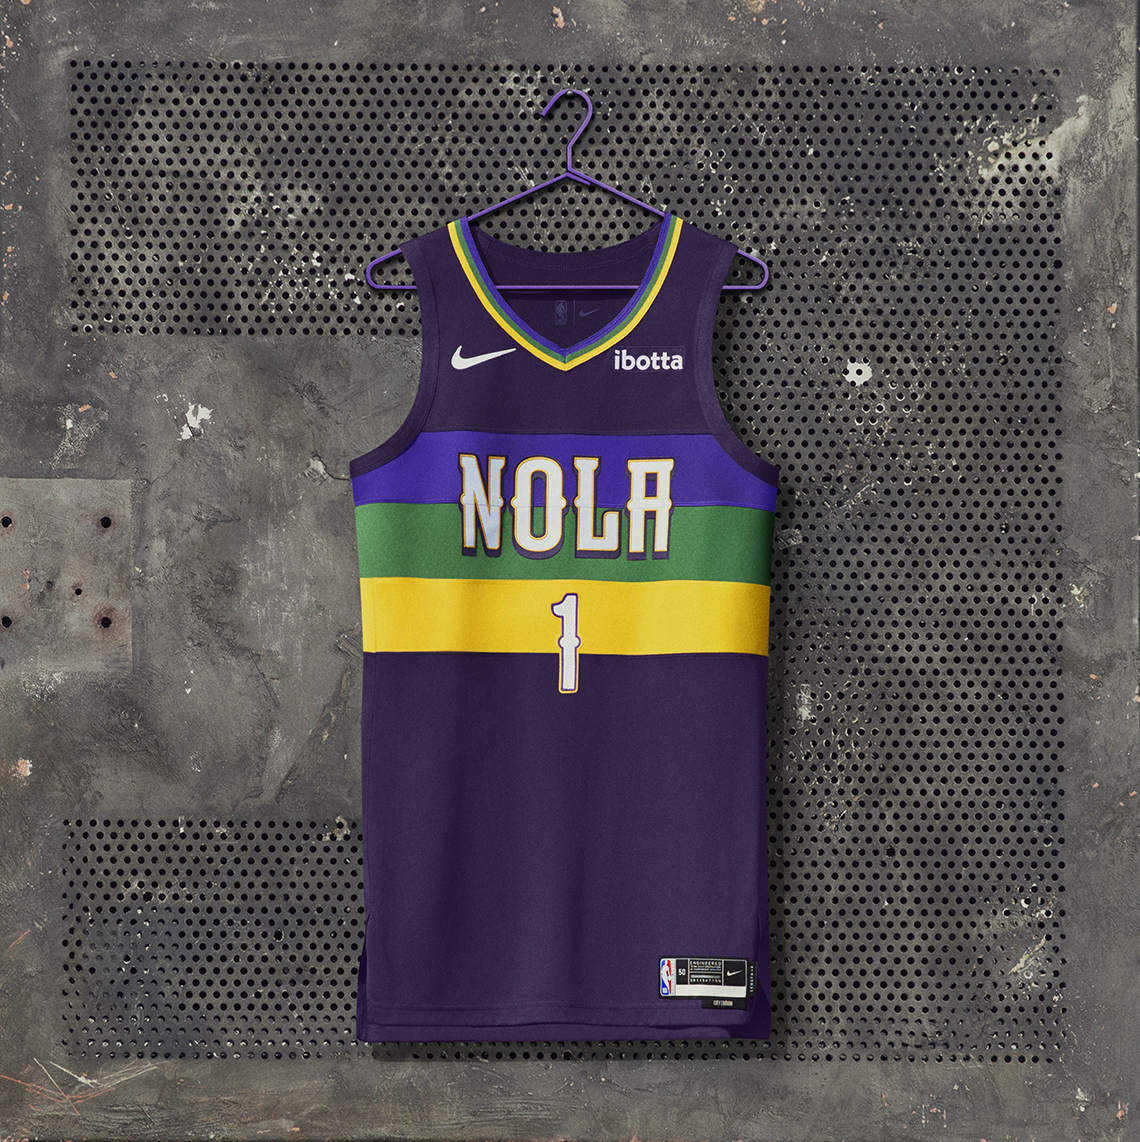 Every New NBA City Edition Uniform for 2022-2023: A Breakdown